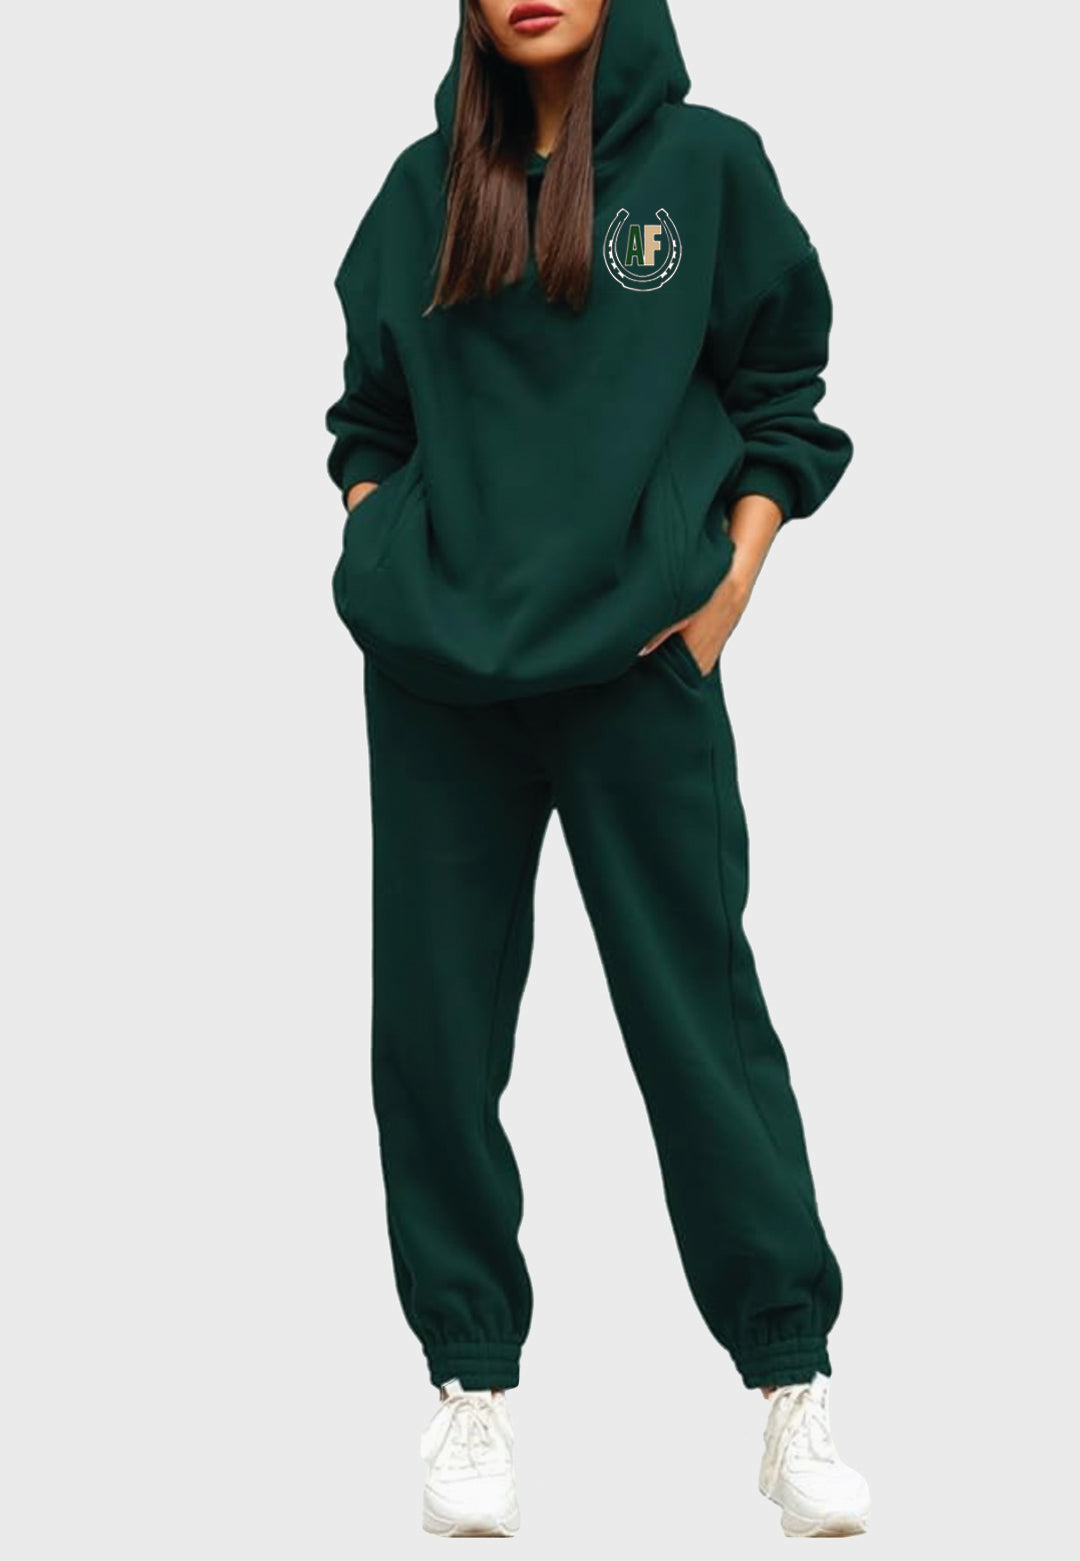 Amblefoot Farms Linsery Ladies Hooded 2-Piece Tracksuit Set